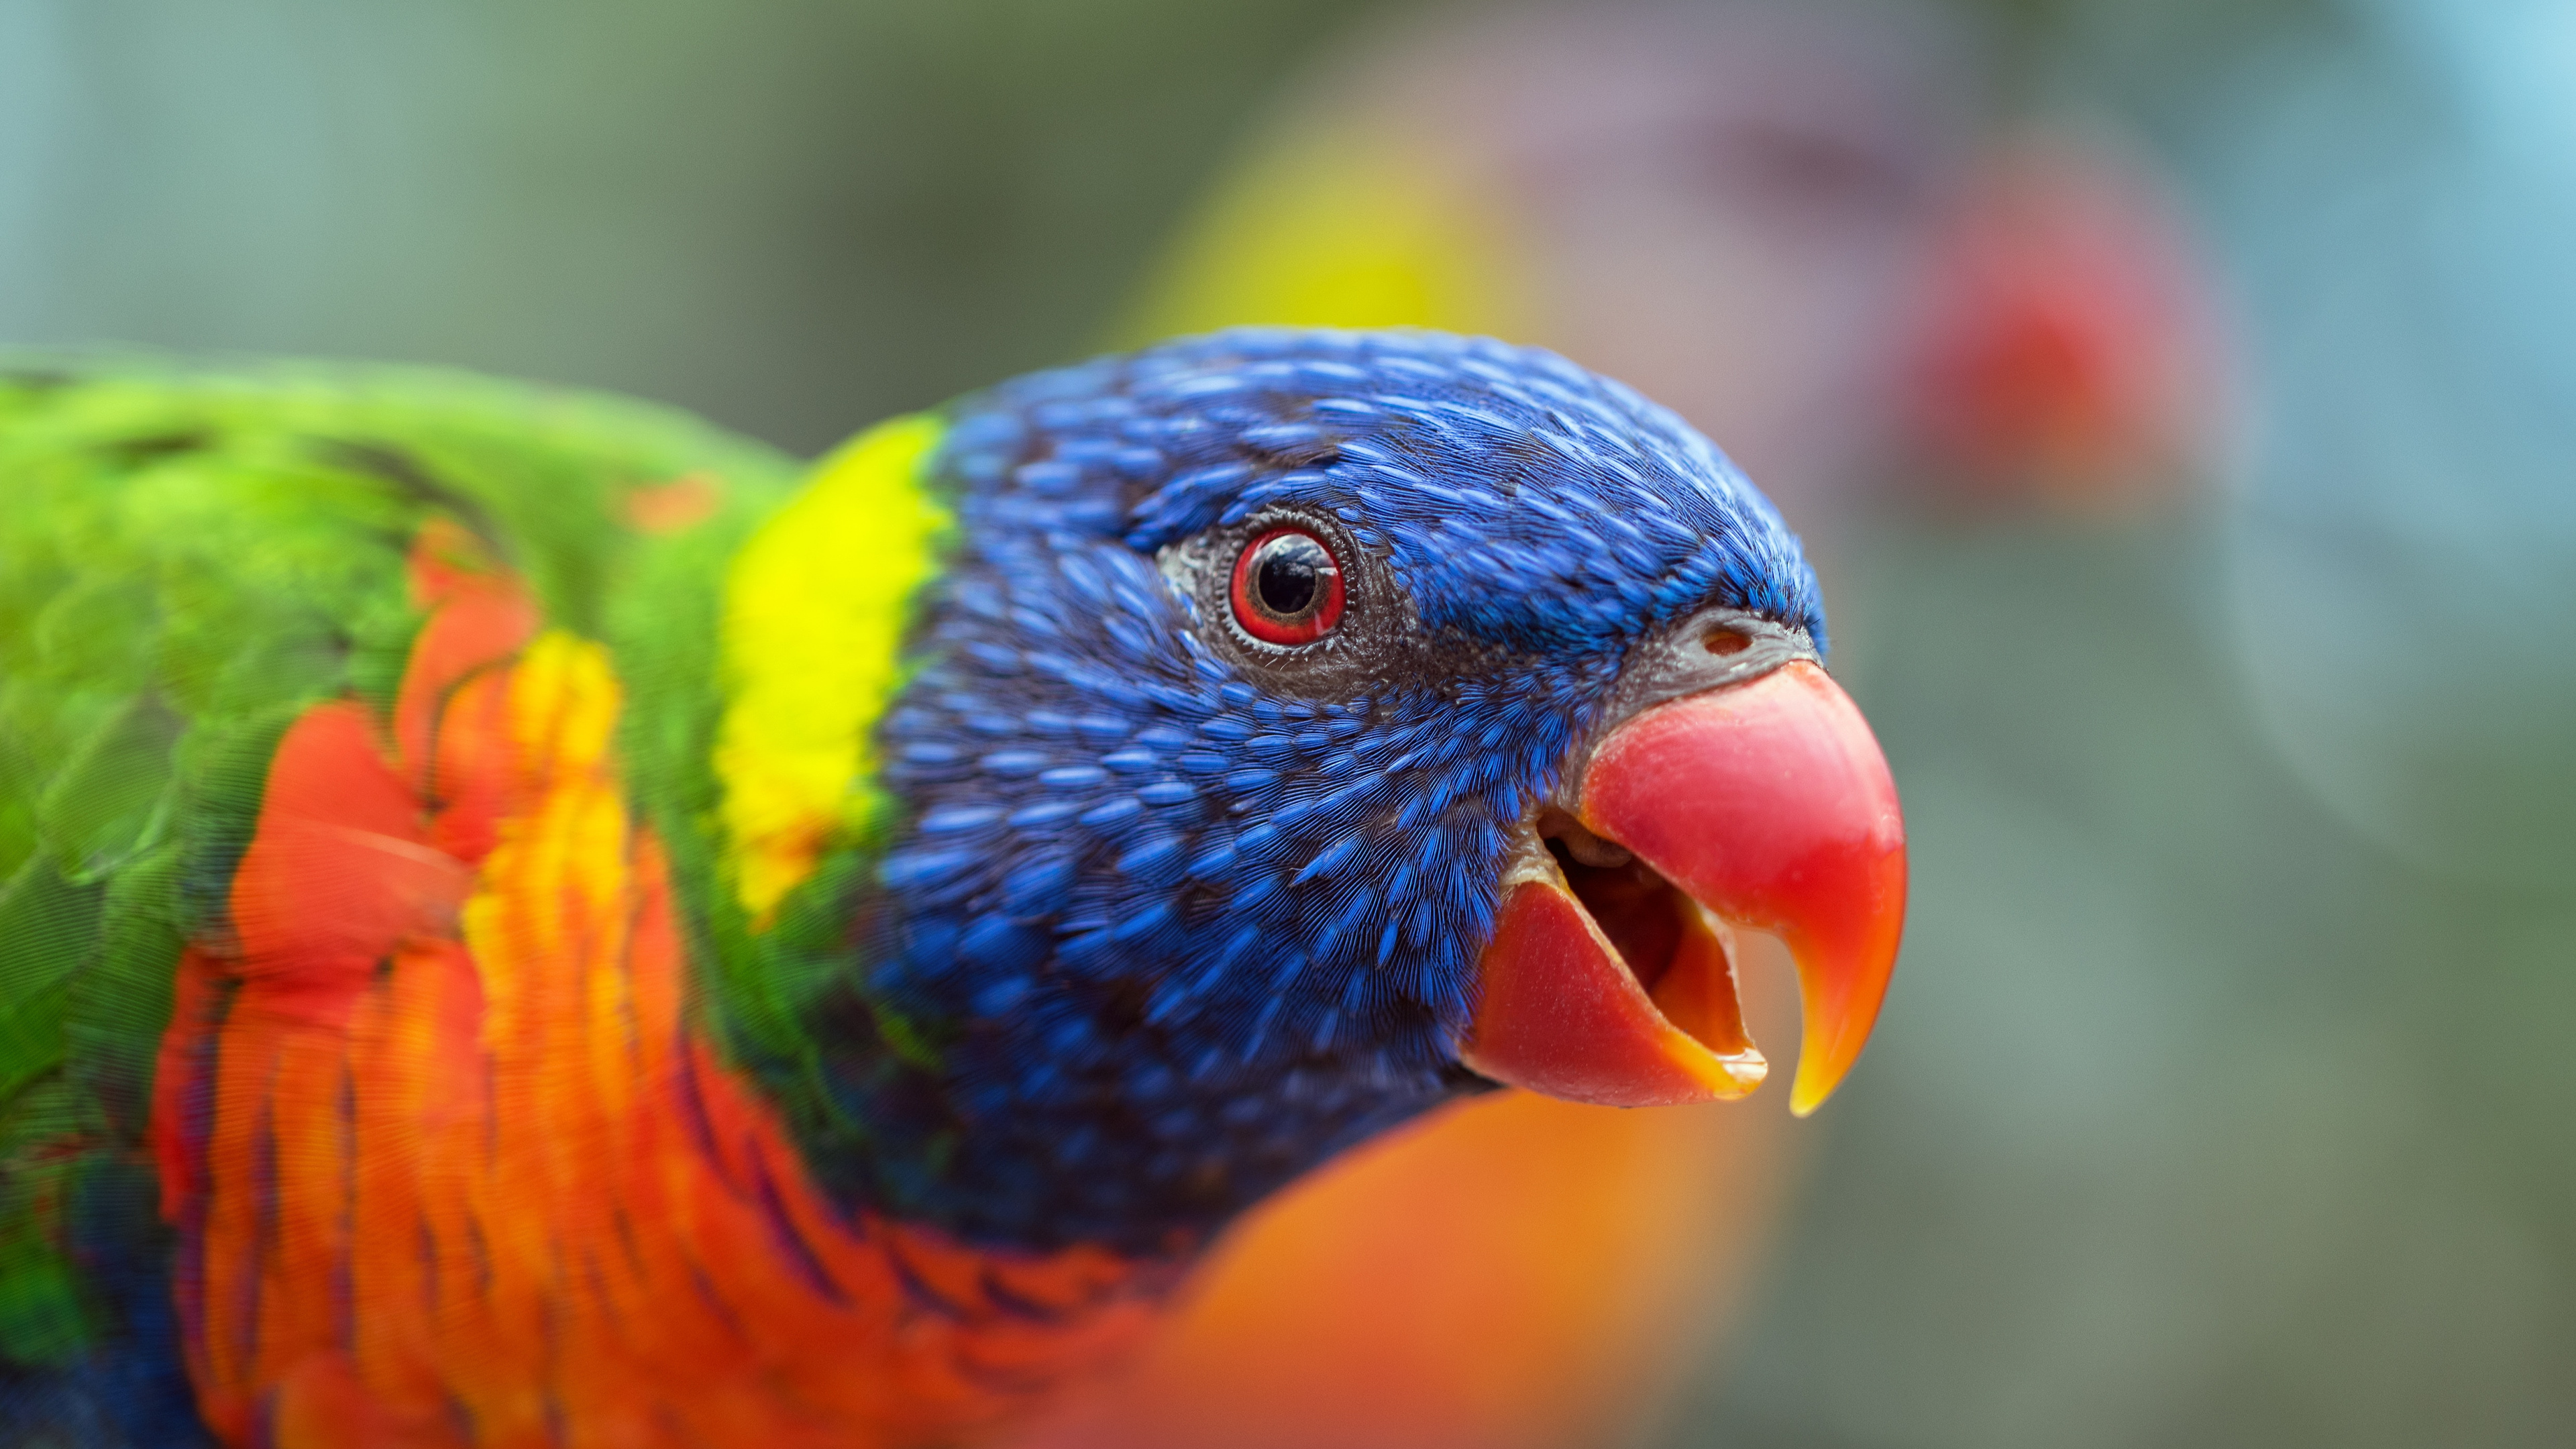 Blue Yellow and Red Bird. Wallpaper in 3840x2160 Resolution